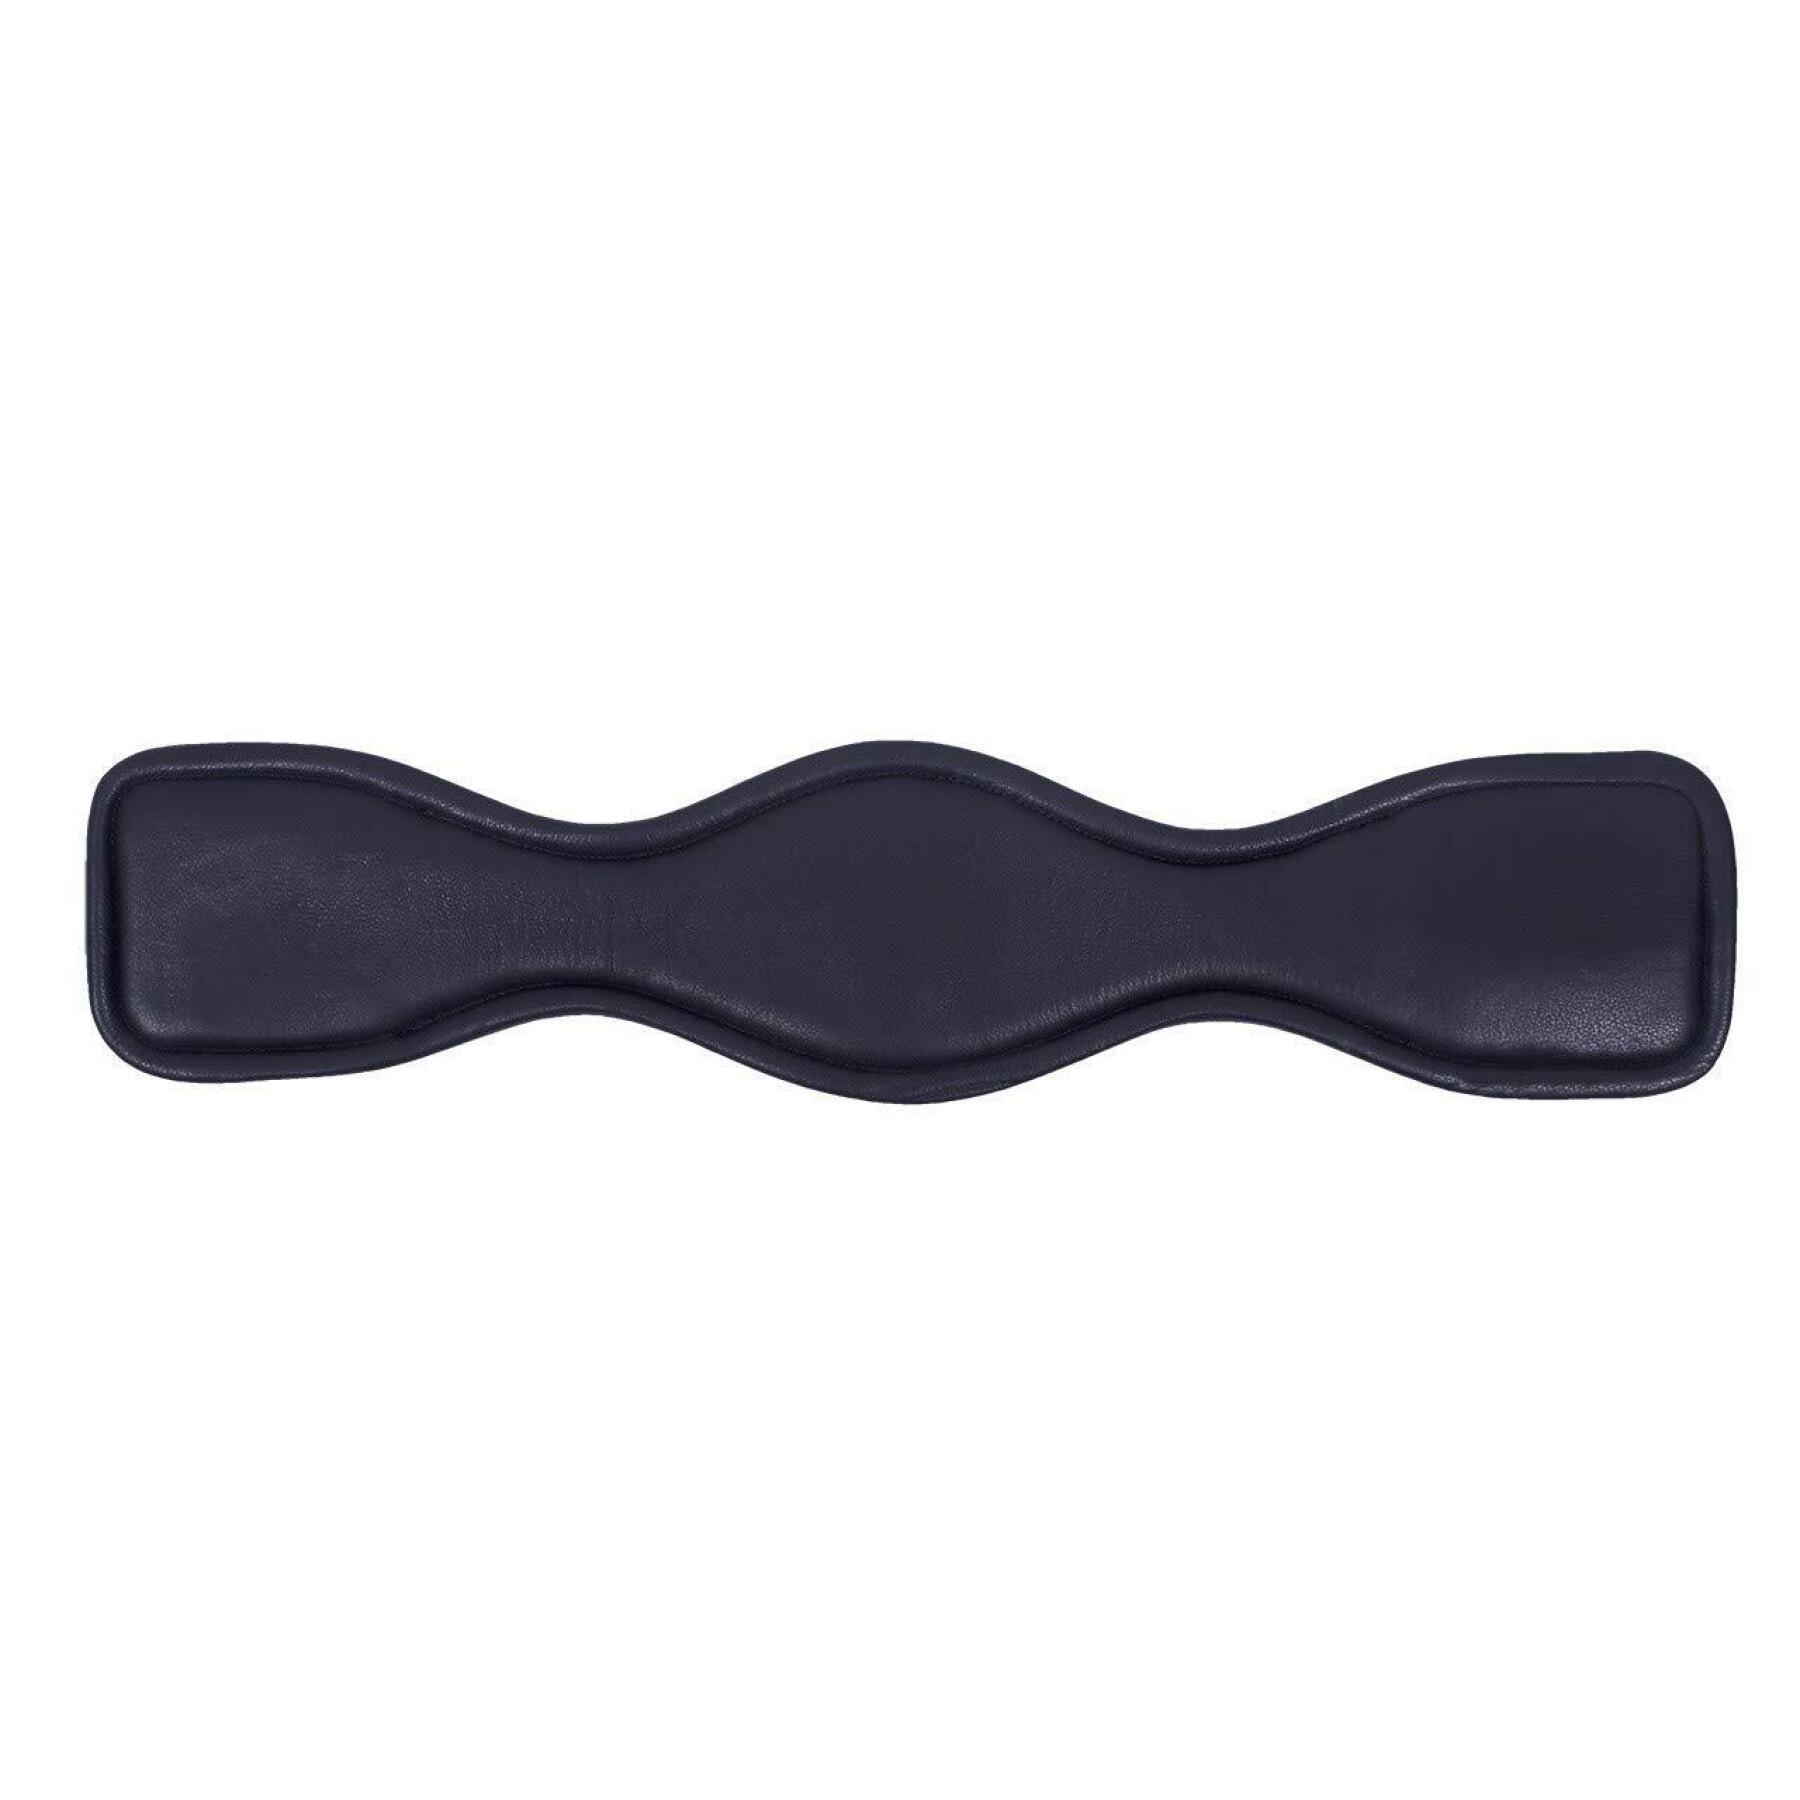 Dressage girth for horses QHP Anatomical